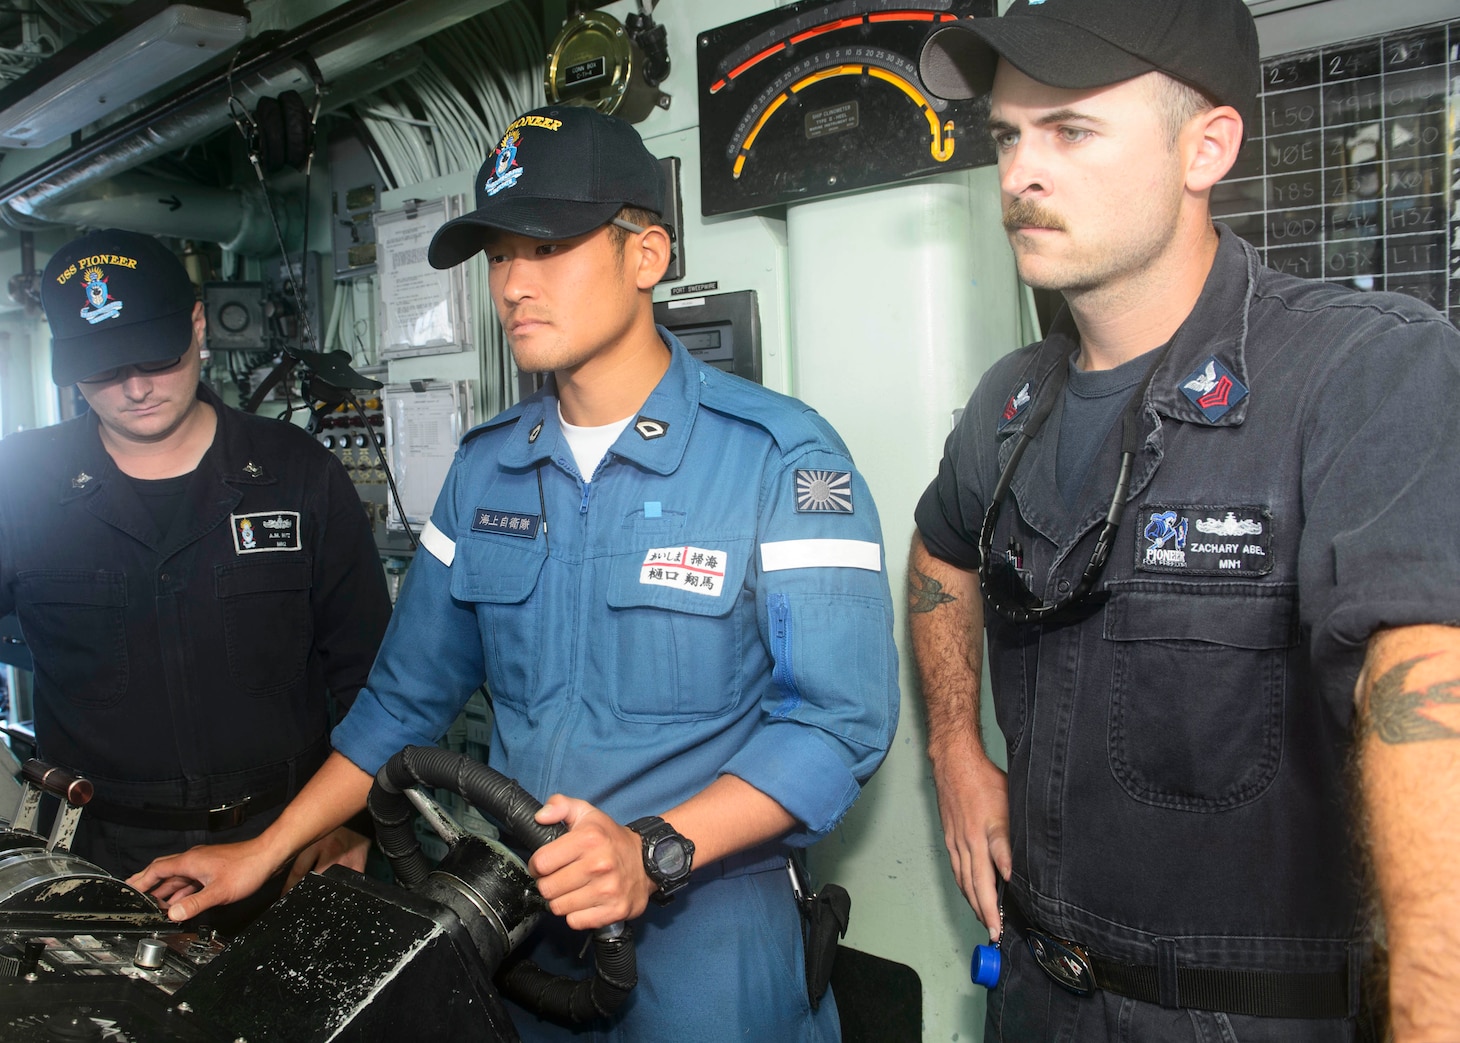 MUTSU, Japan (July 26, 2017) — Petty Officer Third Class Higuchi Shoma, Japanese Maritime Self Defense Force (JMSDF), center, pilots USS Pioneer during 2JA 2017 Mine Countermeasures Exercise (2JA-17 MCMEX) as Mineman First Class Zachary Abel, right, observes. 2JA Mine Countermeasures Exercise is an annual bilateral exercise held between the U.S. Navy and JMSDF to strengthen interoperability and increase proficiencies in mine countermeasure operations.